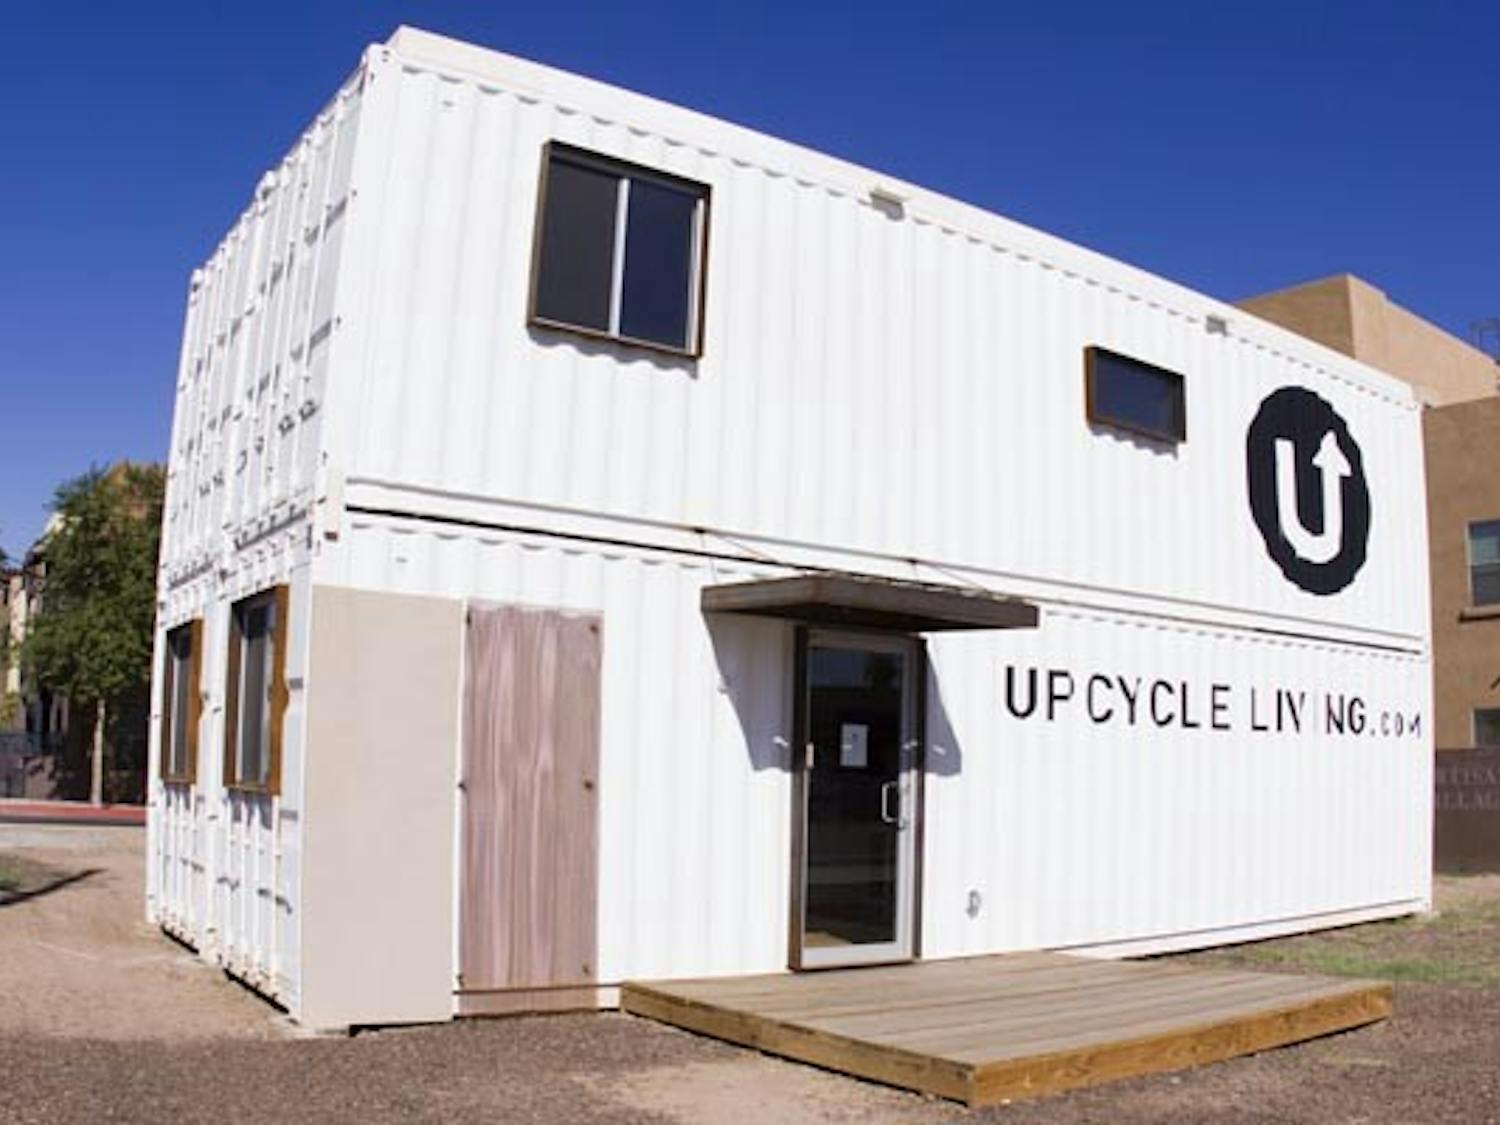 RECYCLED MATERIALS: Upcycle Living in Phoenix takes old shipping containers and transforms them into green, affordable living quarters. The group is committed to providing simple, quality products through intelligent design. (Photo by Annie Wechter)